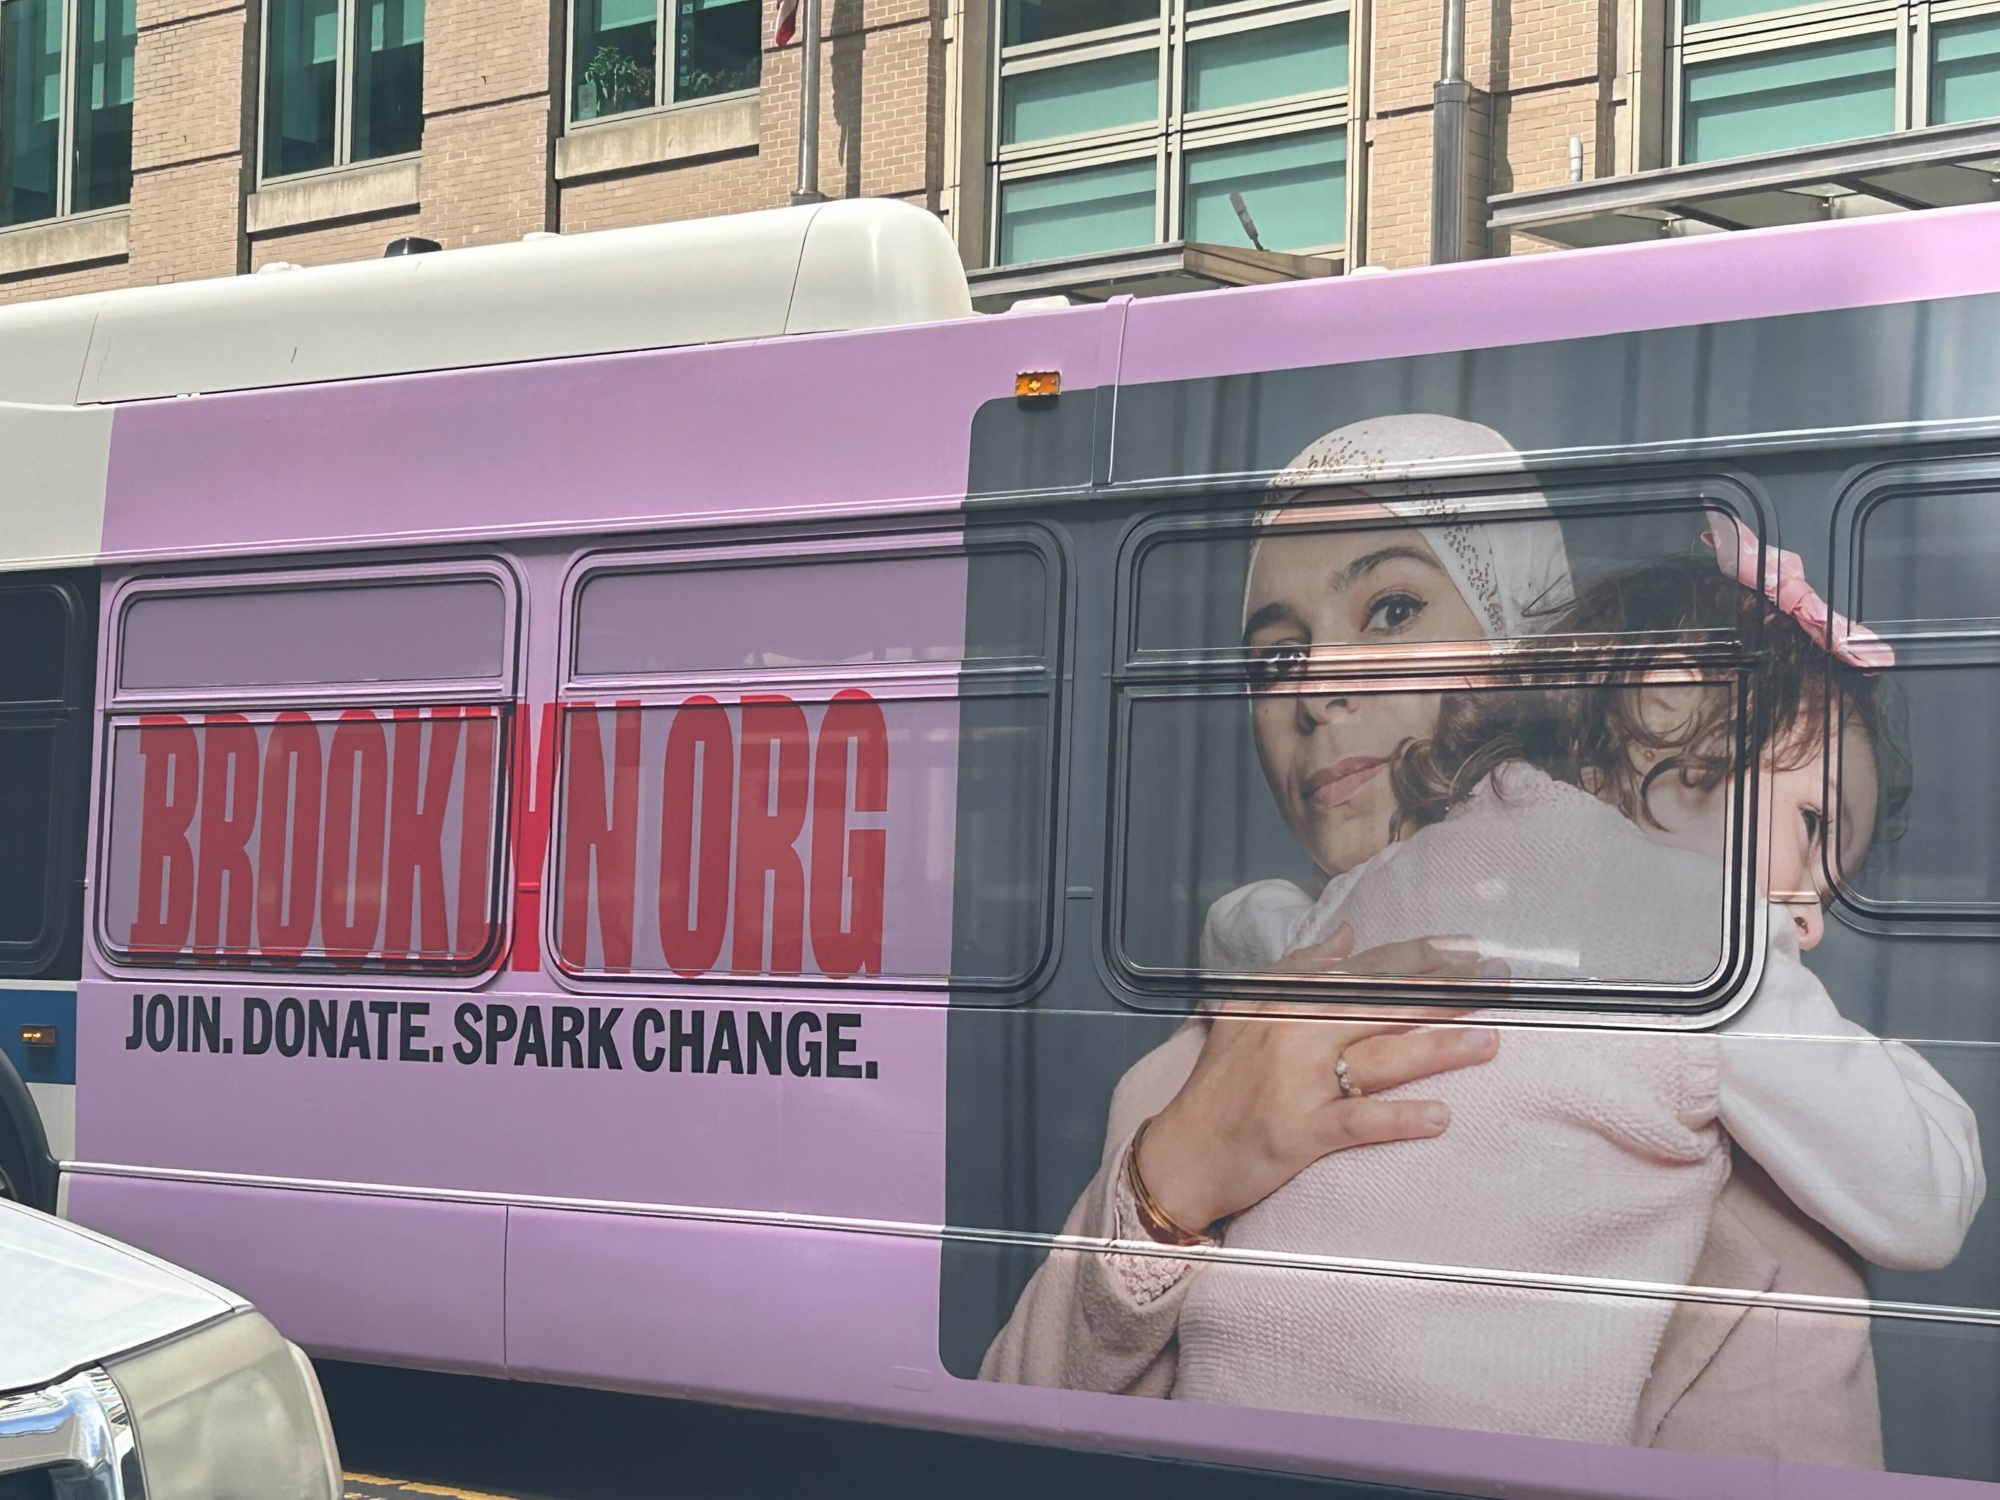 A bus with an advertisement side shows a woman holding a child. The text reads "BROOKLYN.ORG. Join. Donate. Spark Change." It's a heartfelt call to action, encouraging everyone to give to Brooklyn and make a difference in the community.